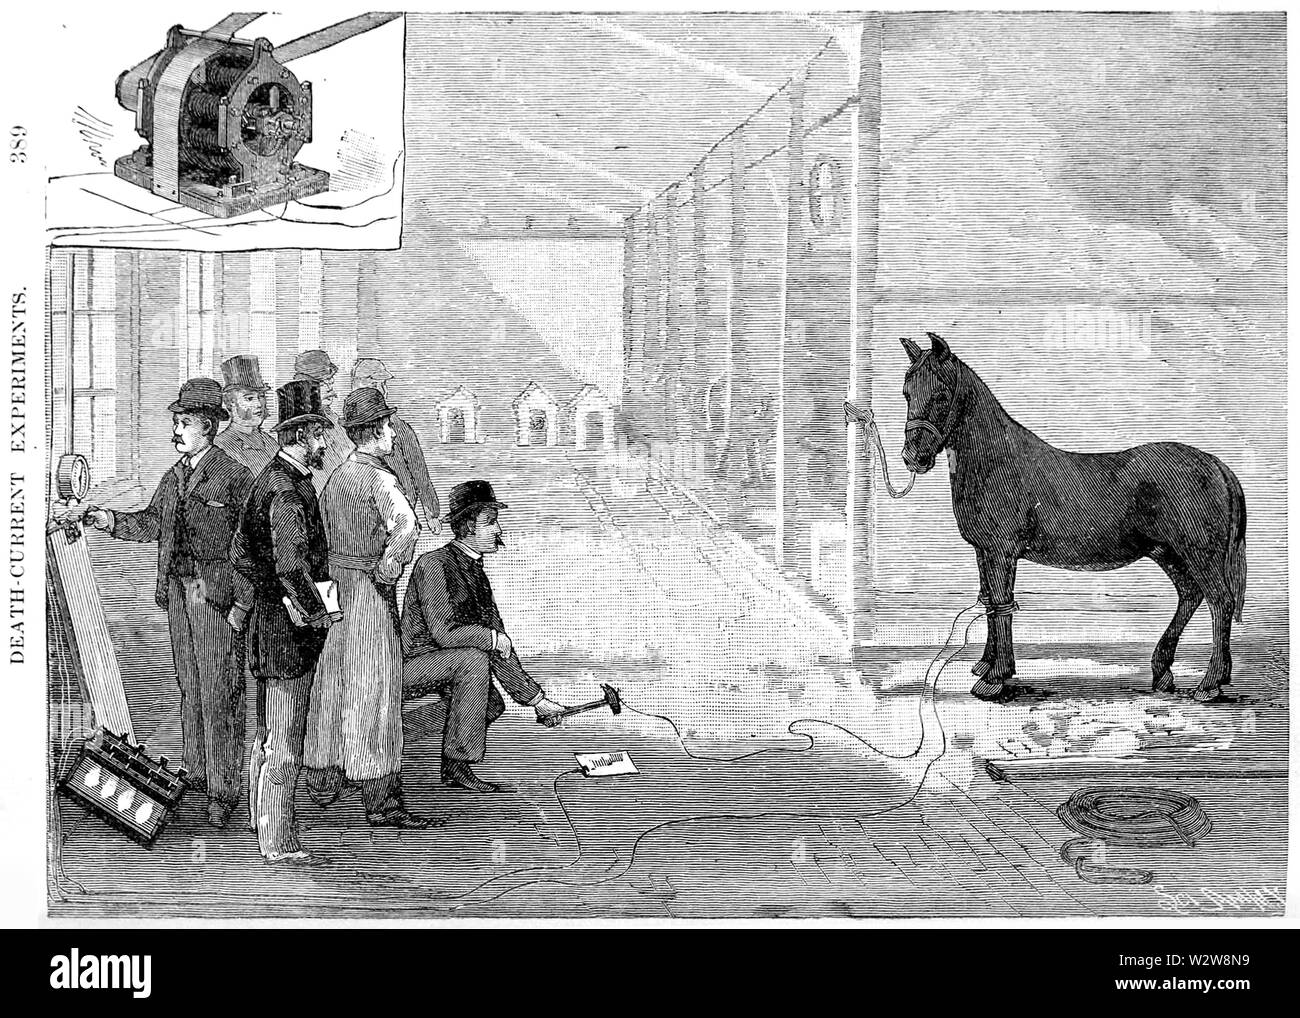 Harold Pitney Brown edison electrocute horse 1888 New York Medico-Legal Journal vol 6 issue 4 Stock Photo